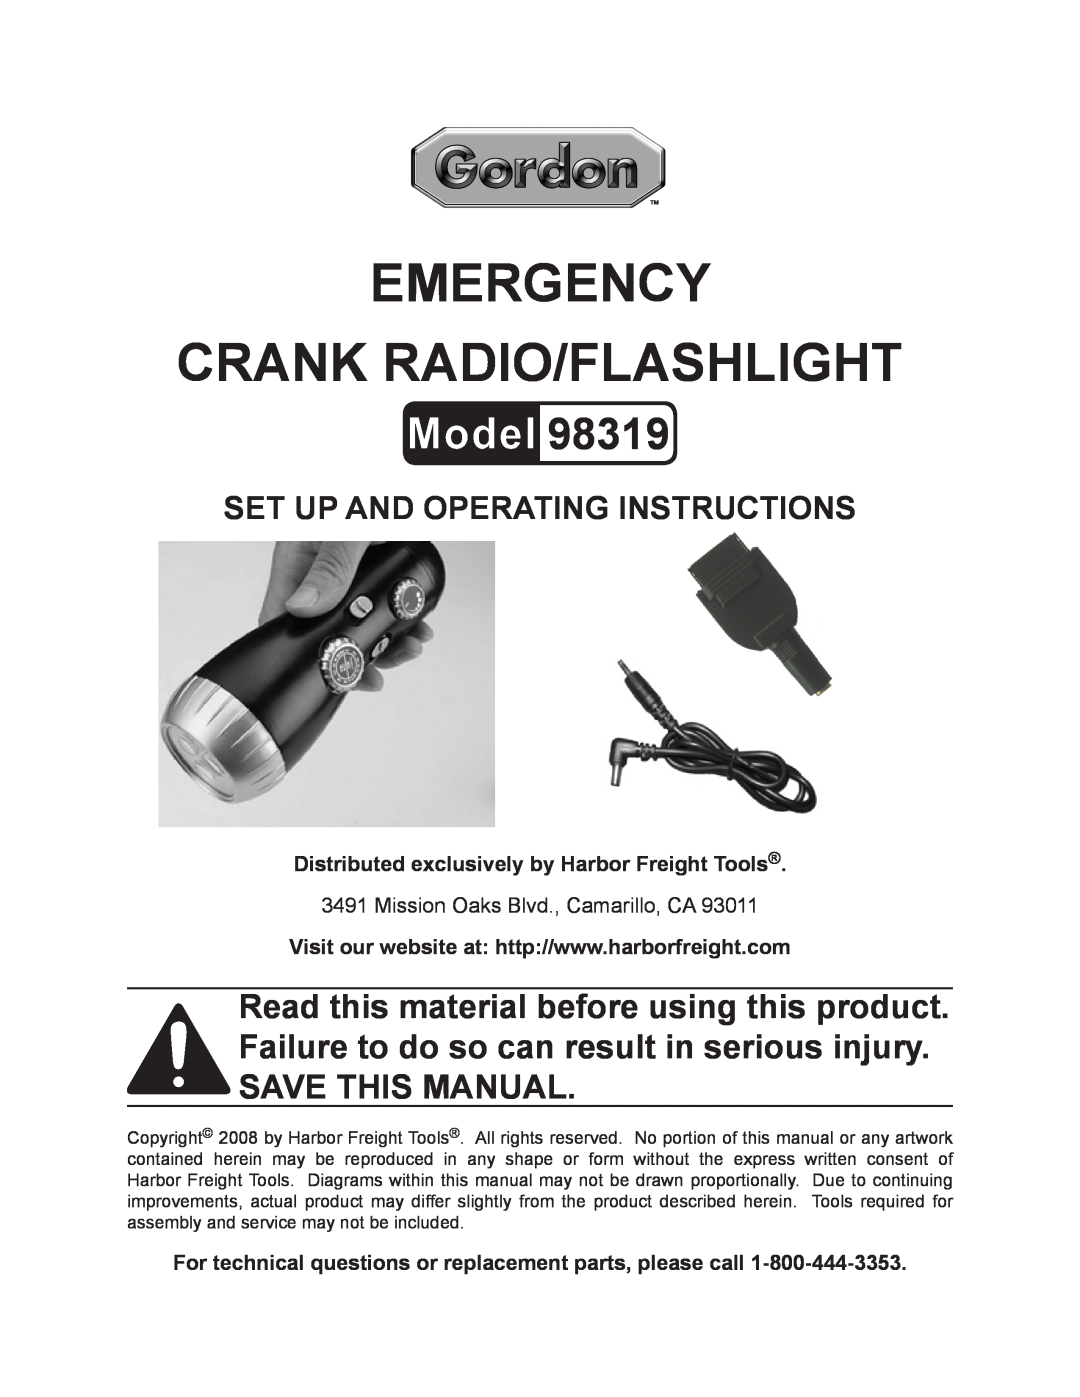 Harbor Freight Tools 98319 manual Distributed exclusively by Harbor Freight Tools, Emergency Crank Radio/Flashlight 